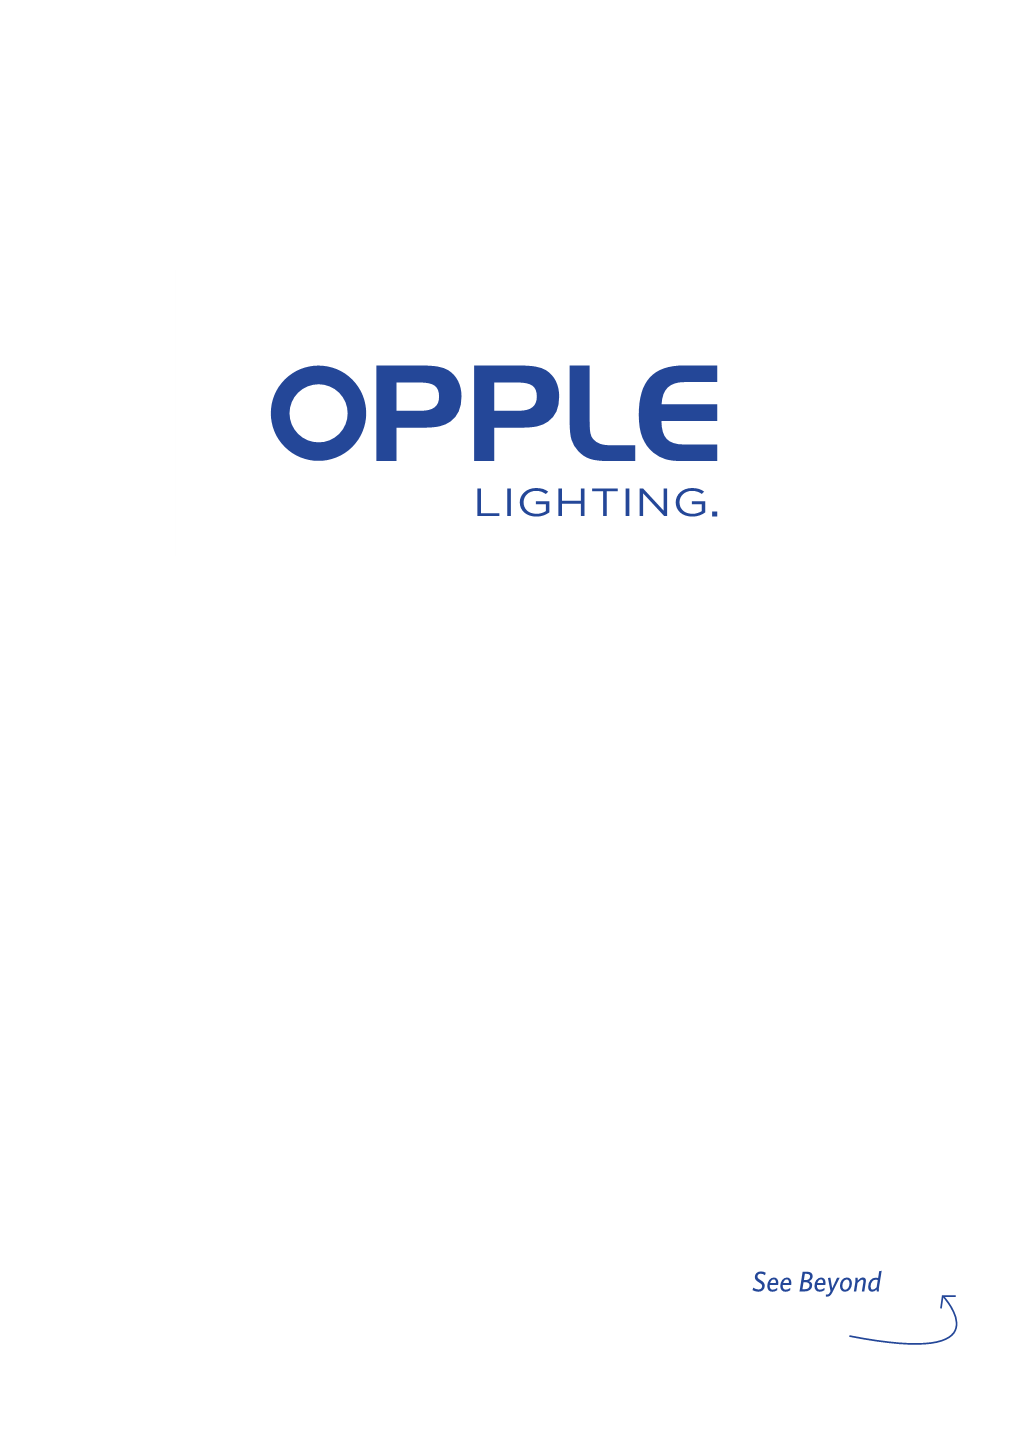 Opple.Com) for the Latest Overview of Our Complete Portfolio and Related Specifications